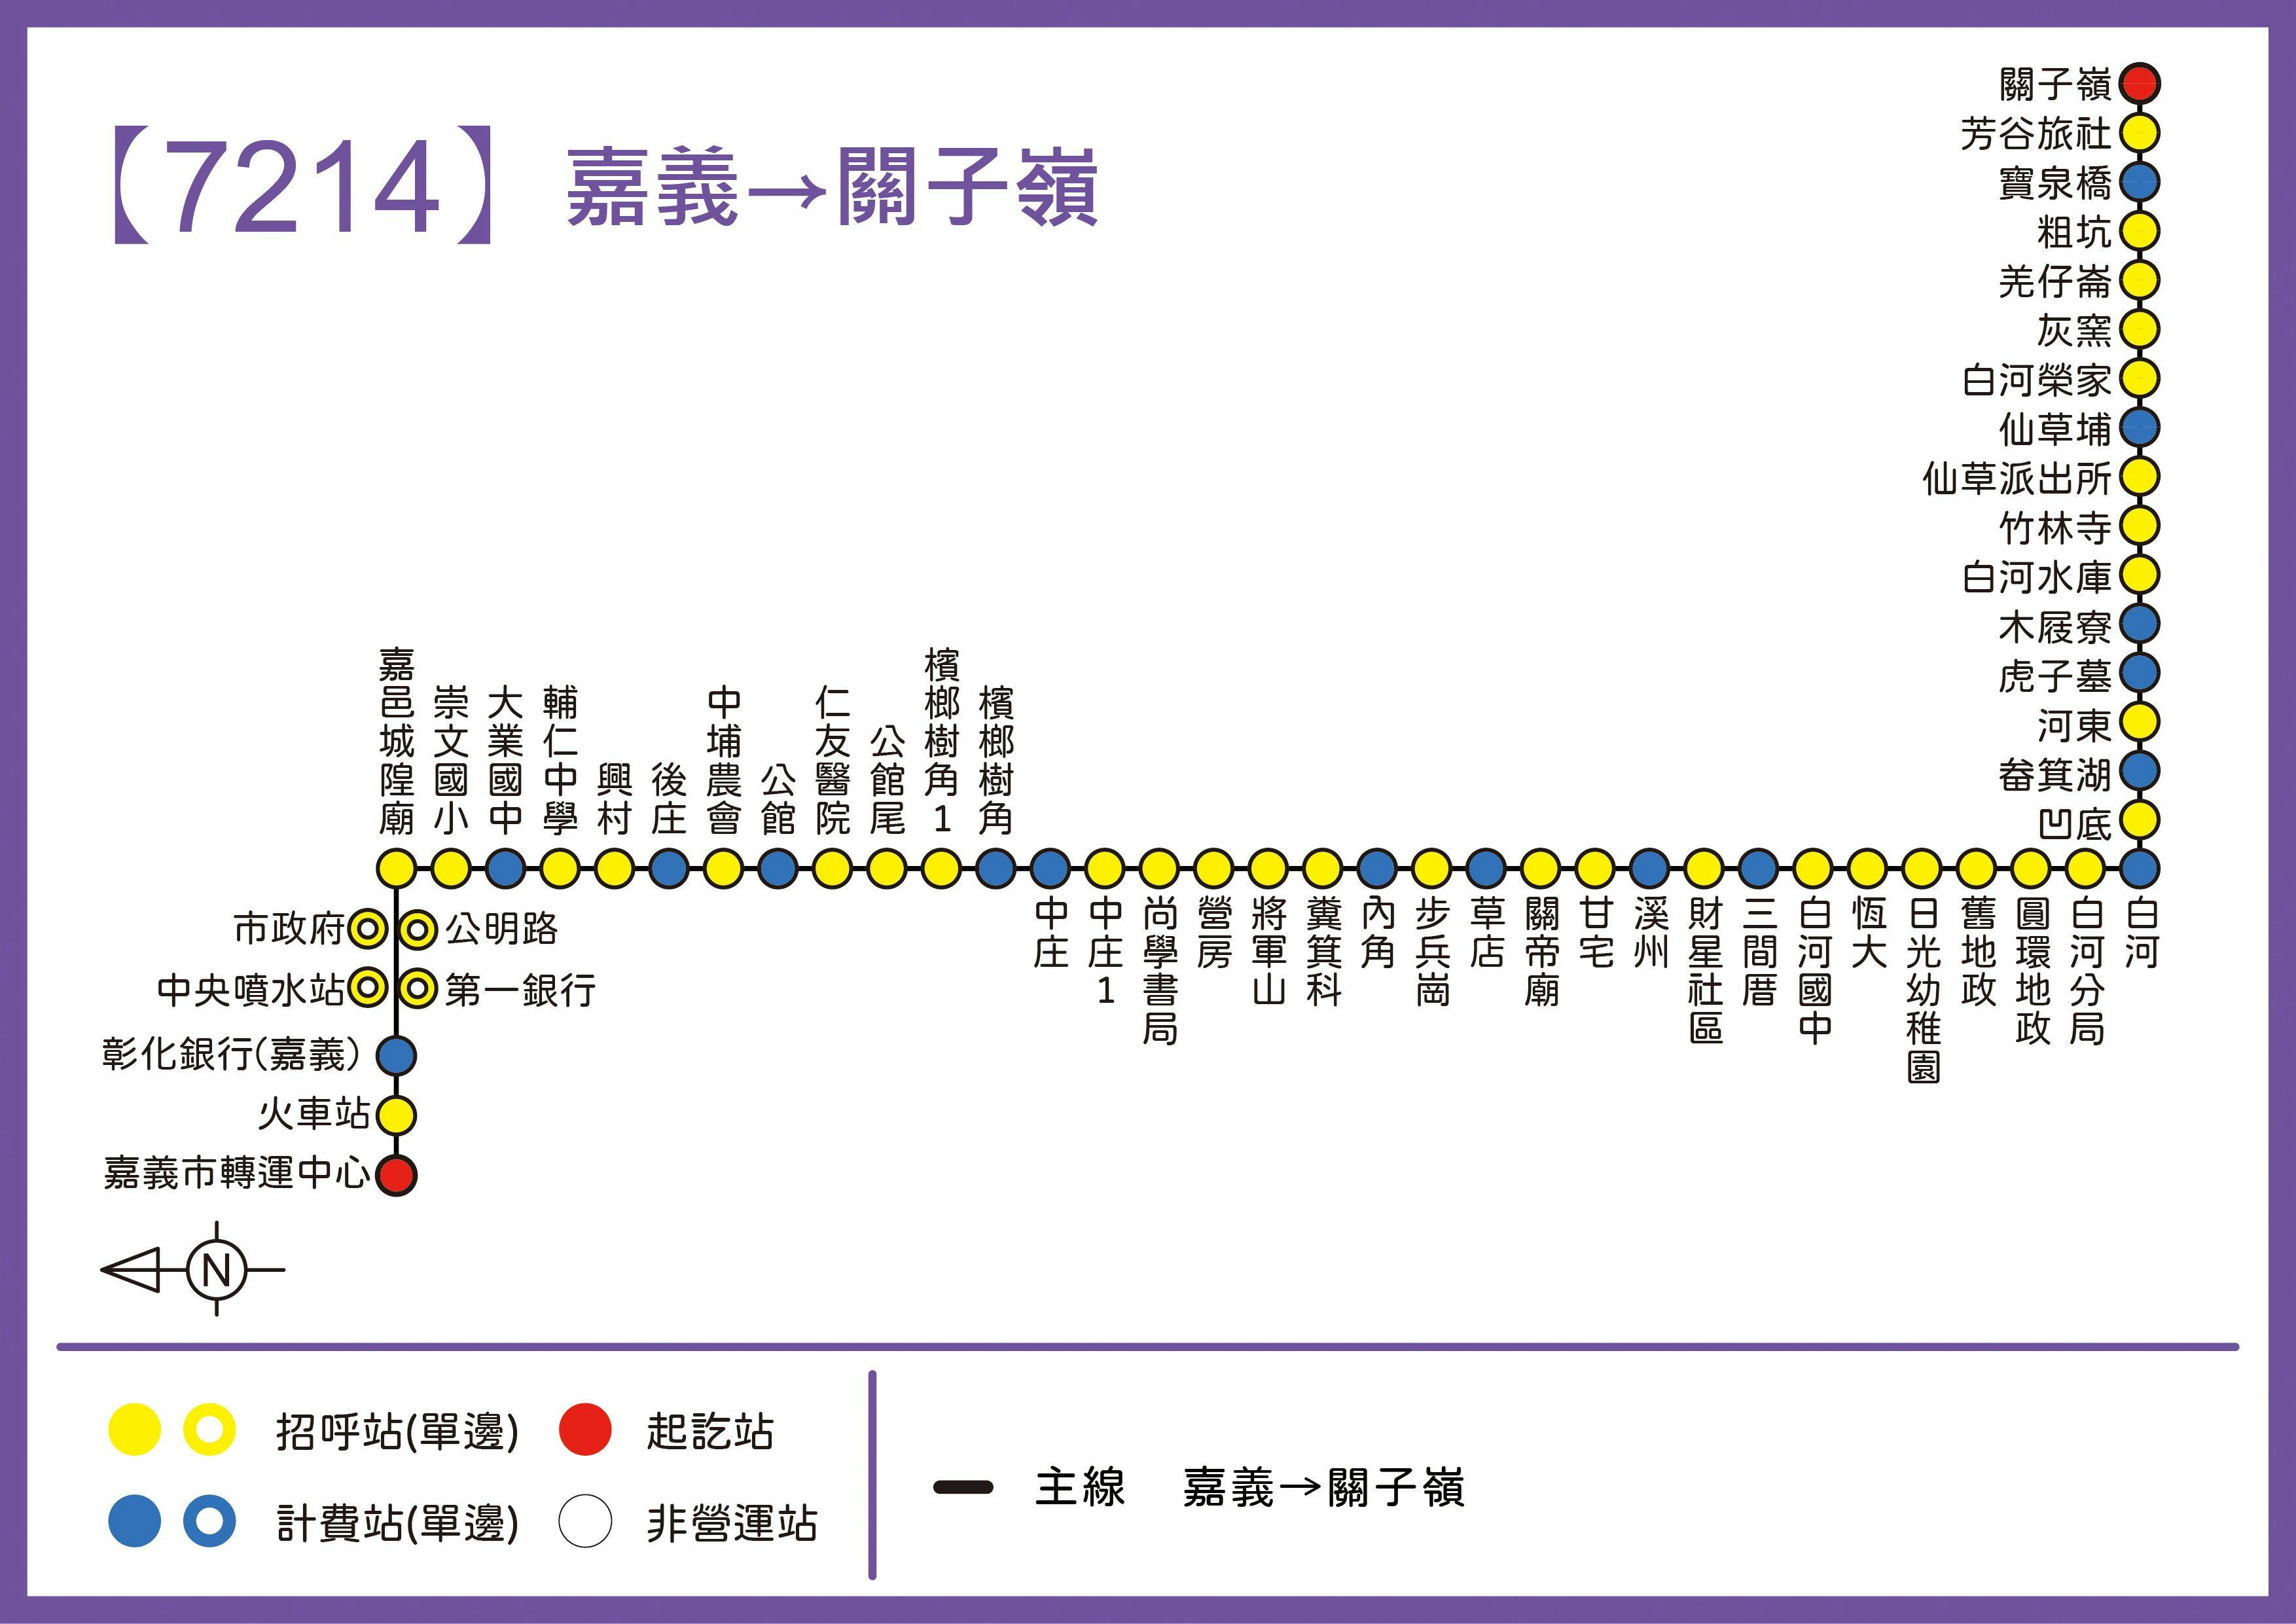 7214Route Map-Chiayi Bus